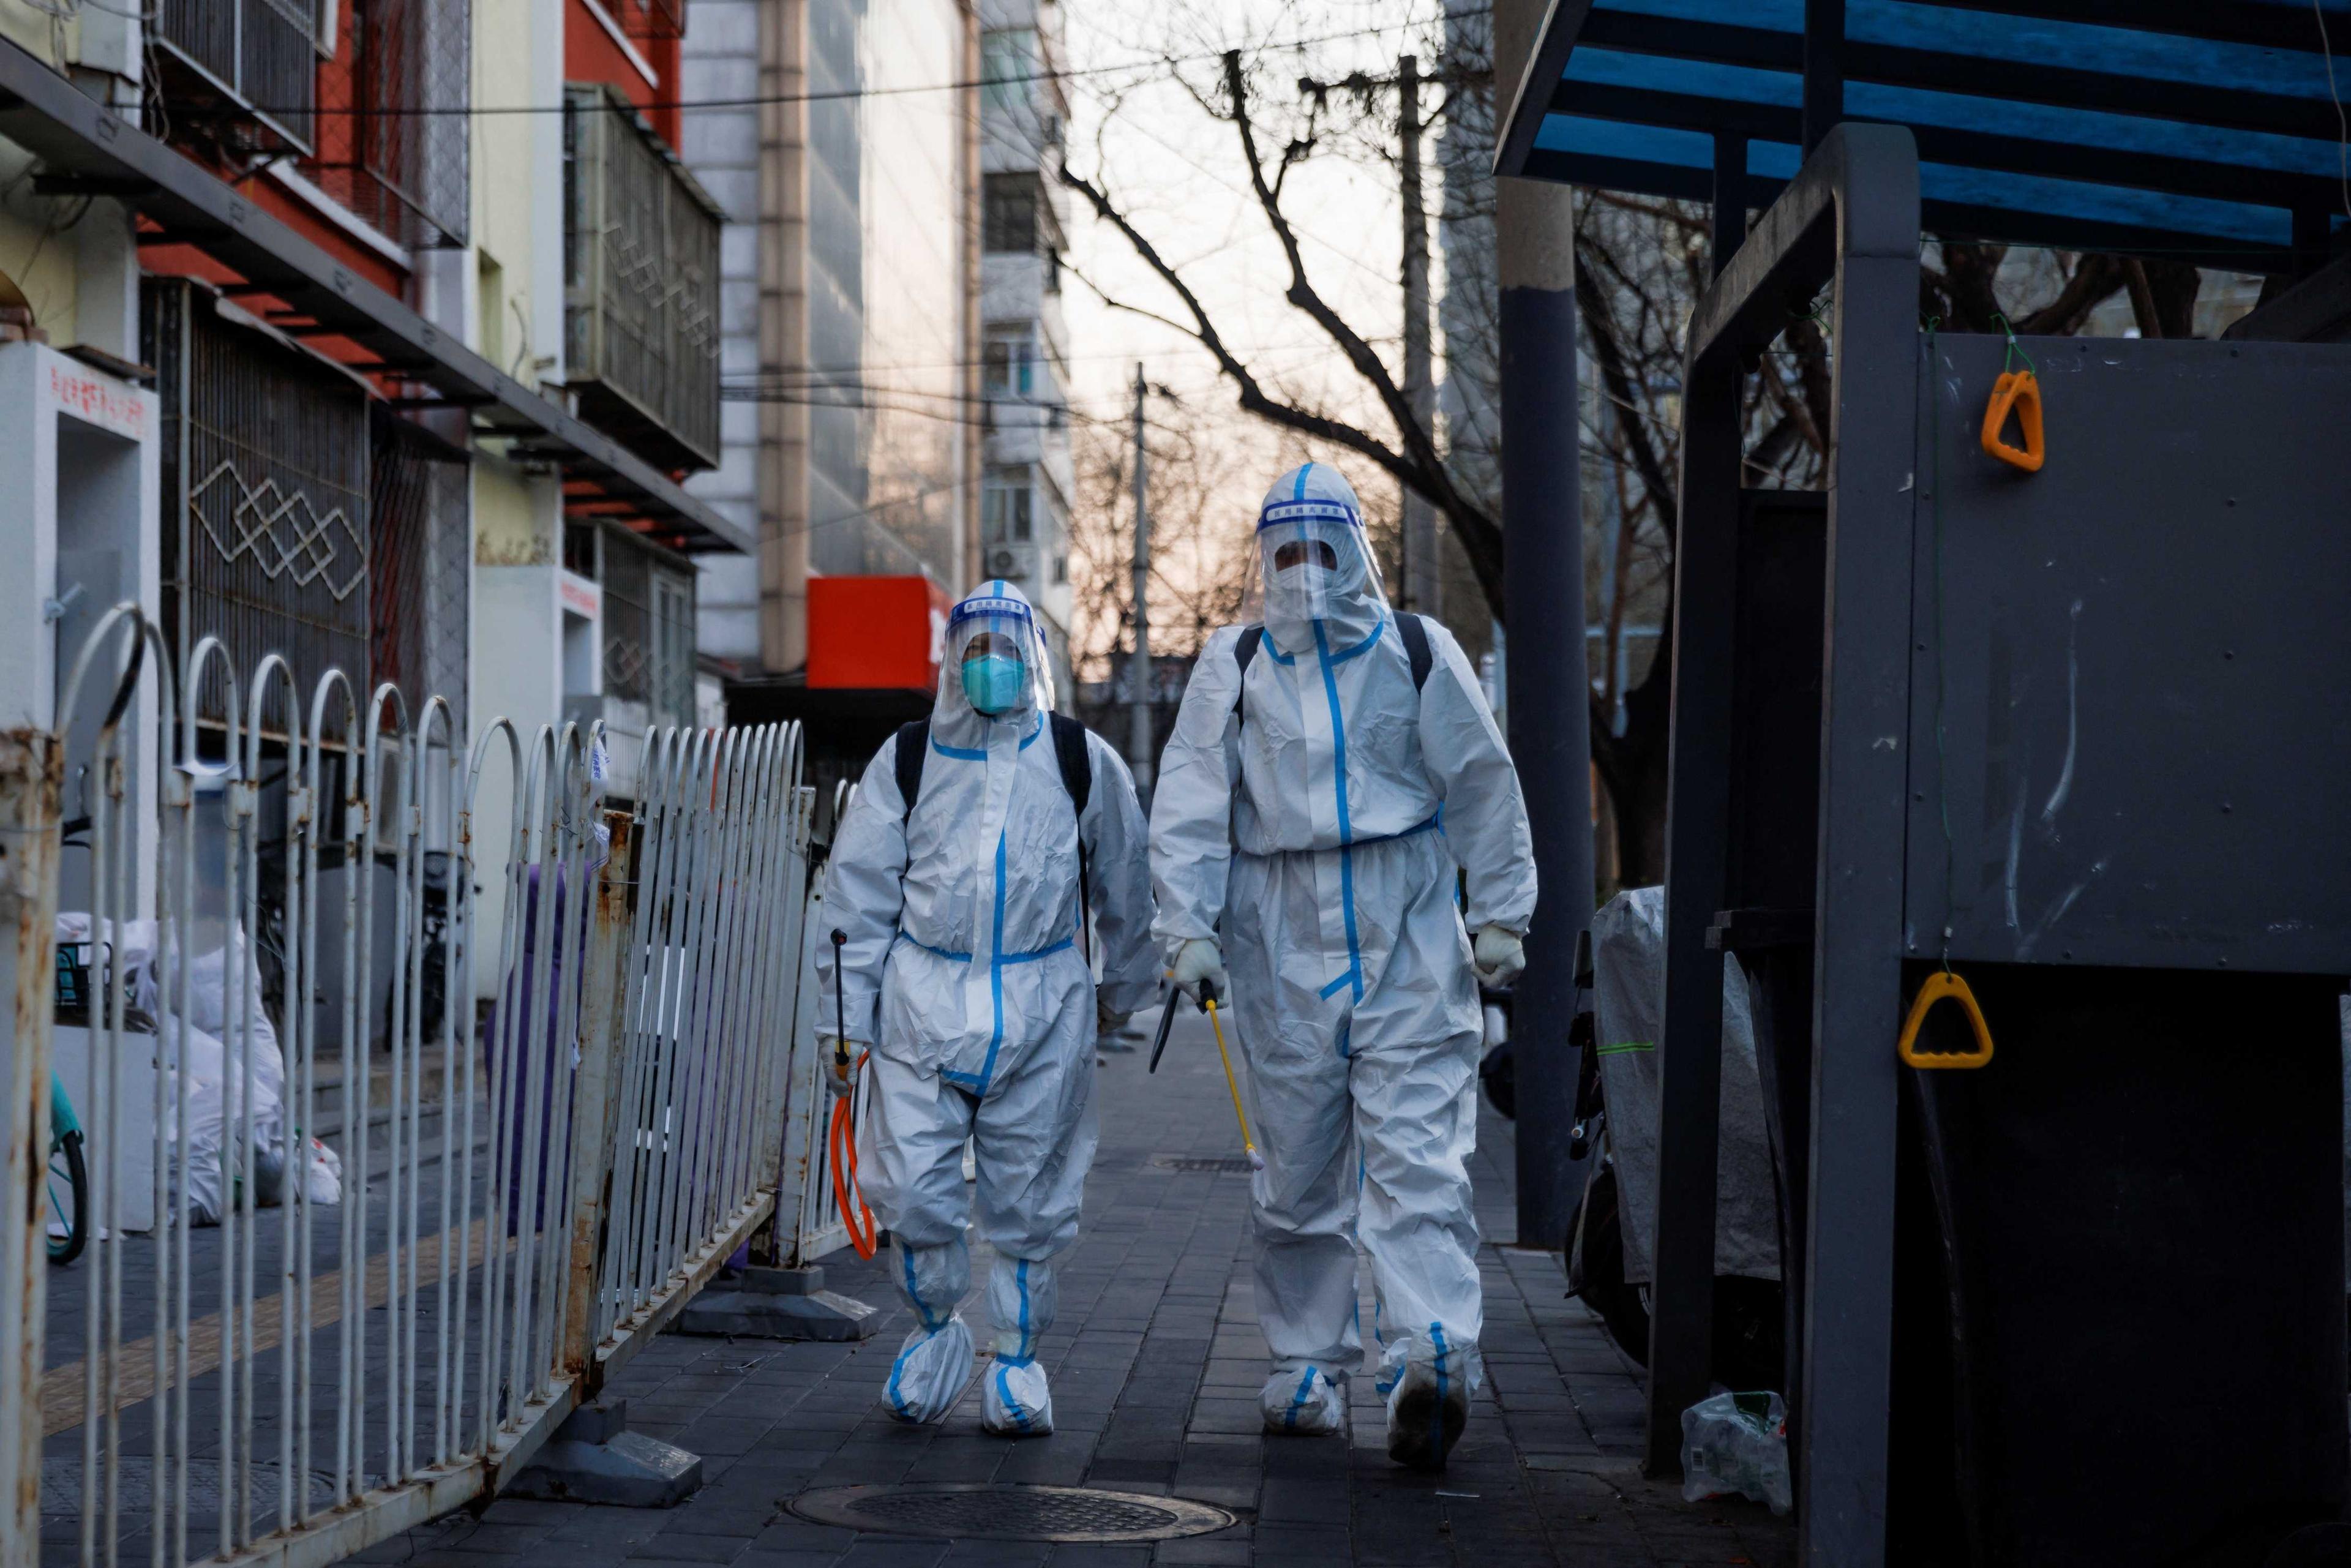 Pandemic prevention workers in protective suits walk in a street as Covid-19 outbreaks continue in Beijing, Dec 4. Photo: Reuters